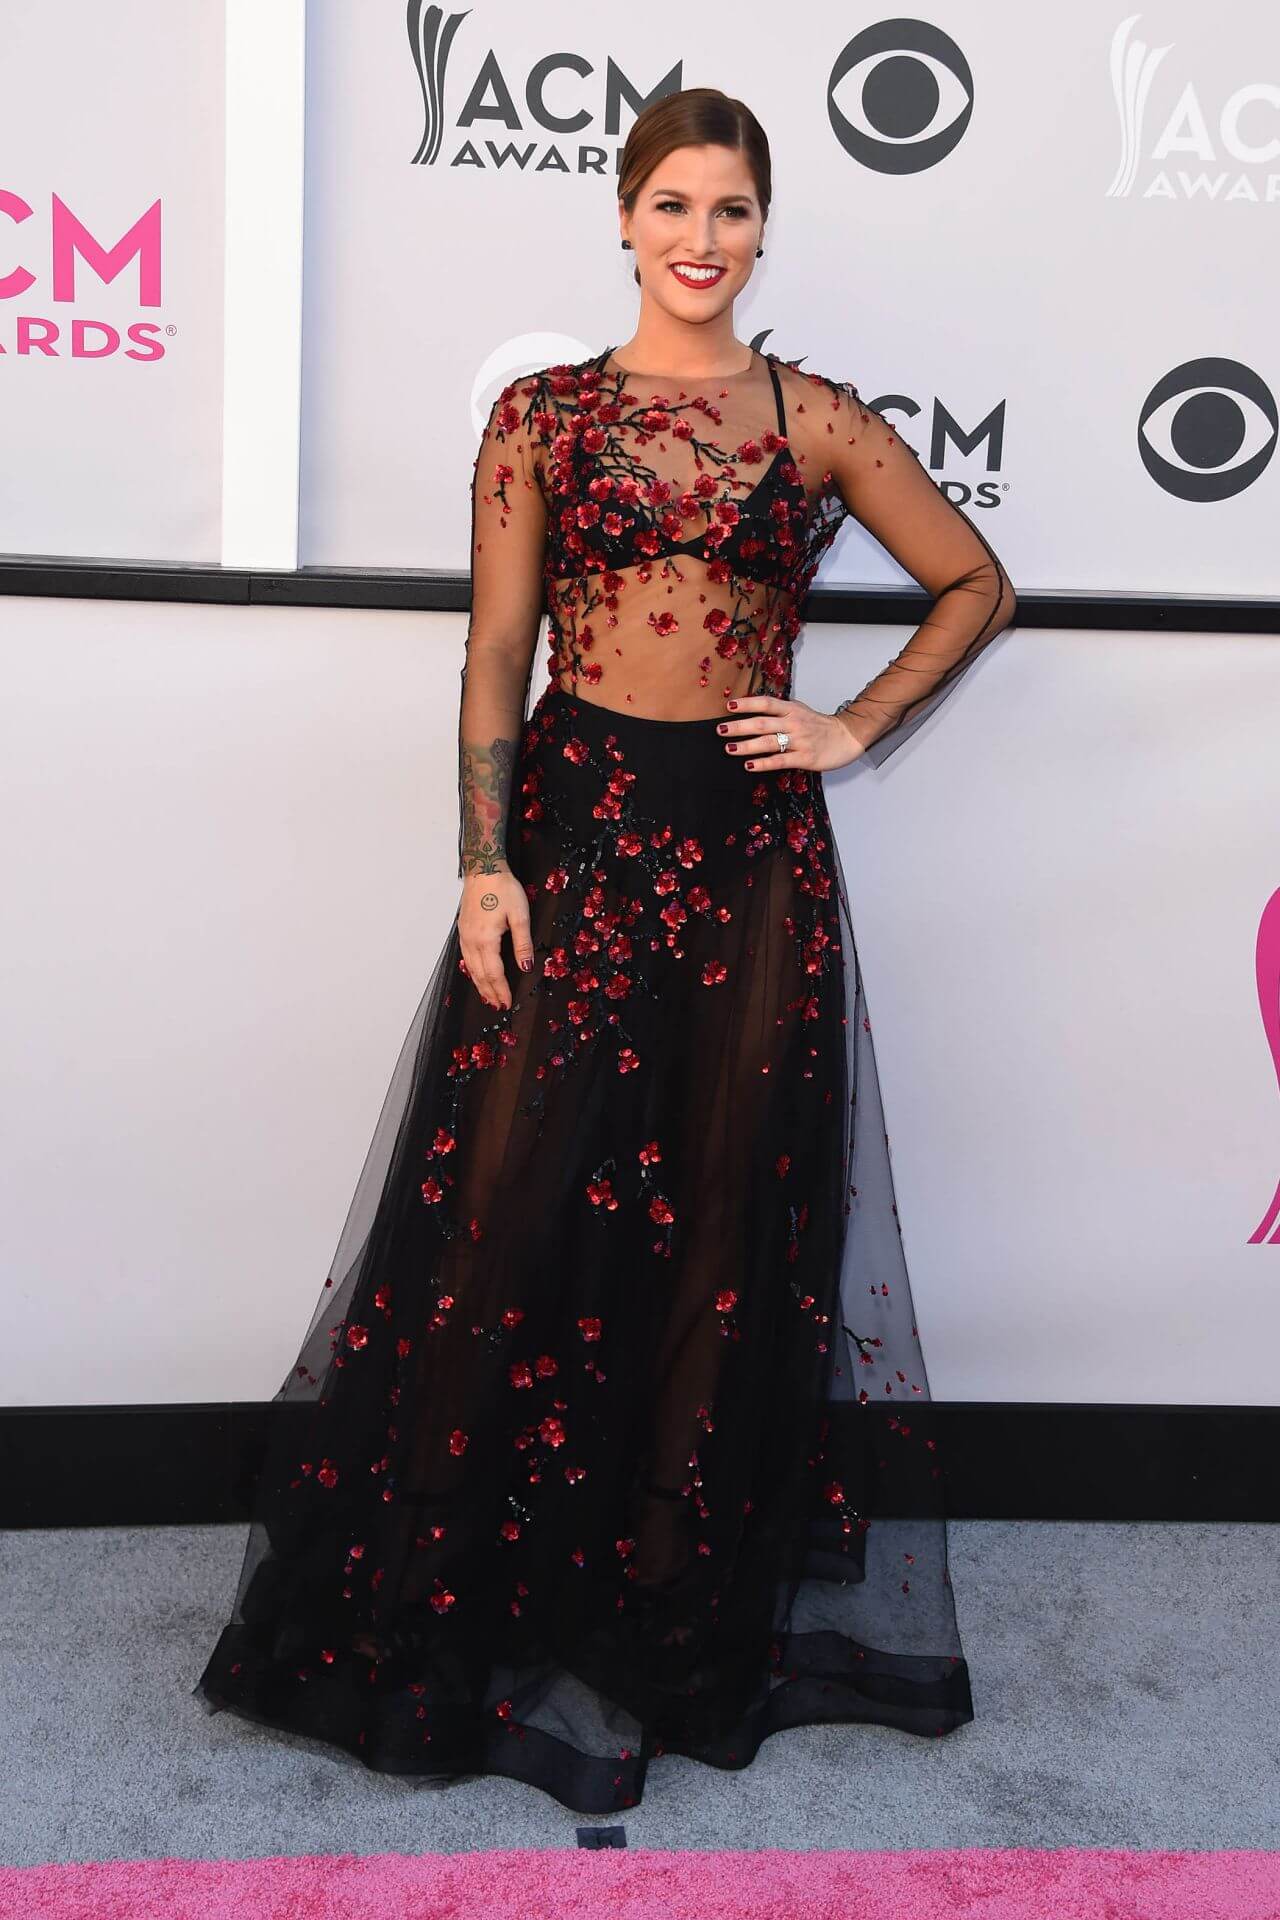 Cassadee Pope In Black Net Fabric Floral Design Long Gown Dress At Academy Of Country Music Awards in Las Vegas